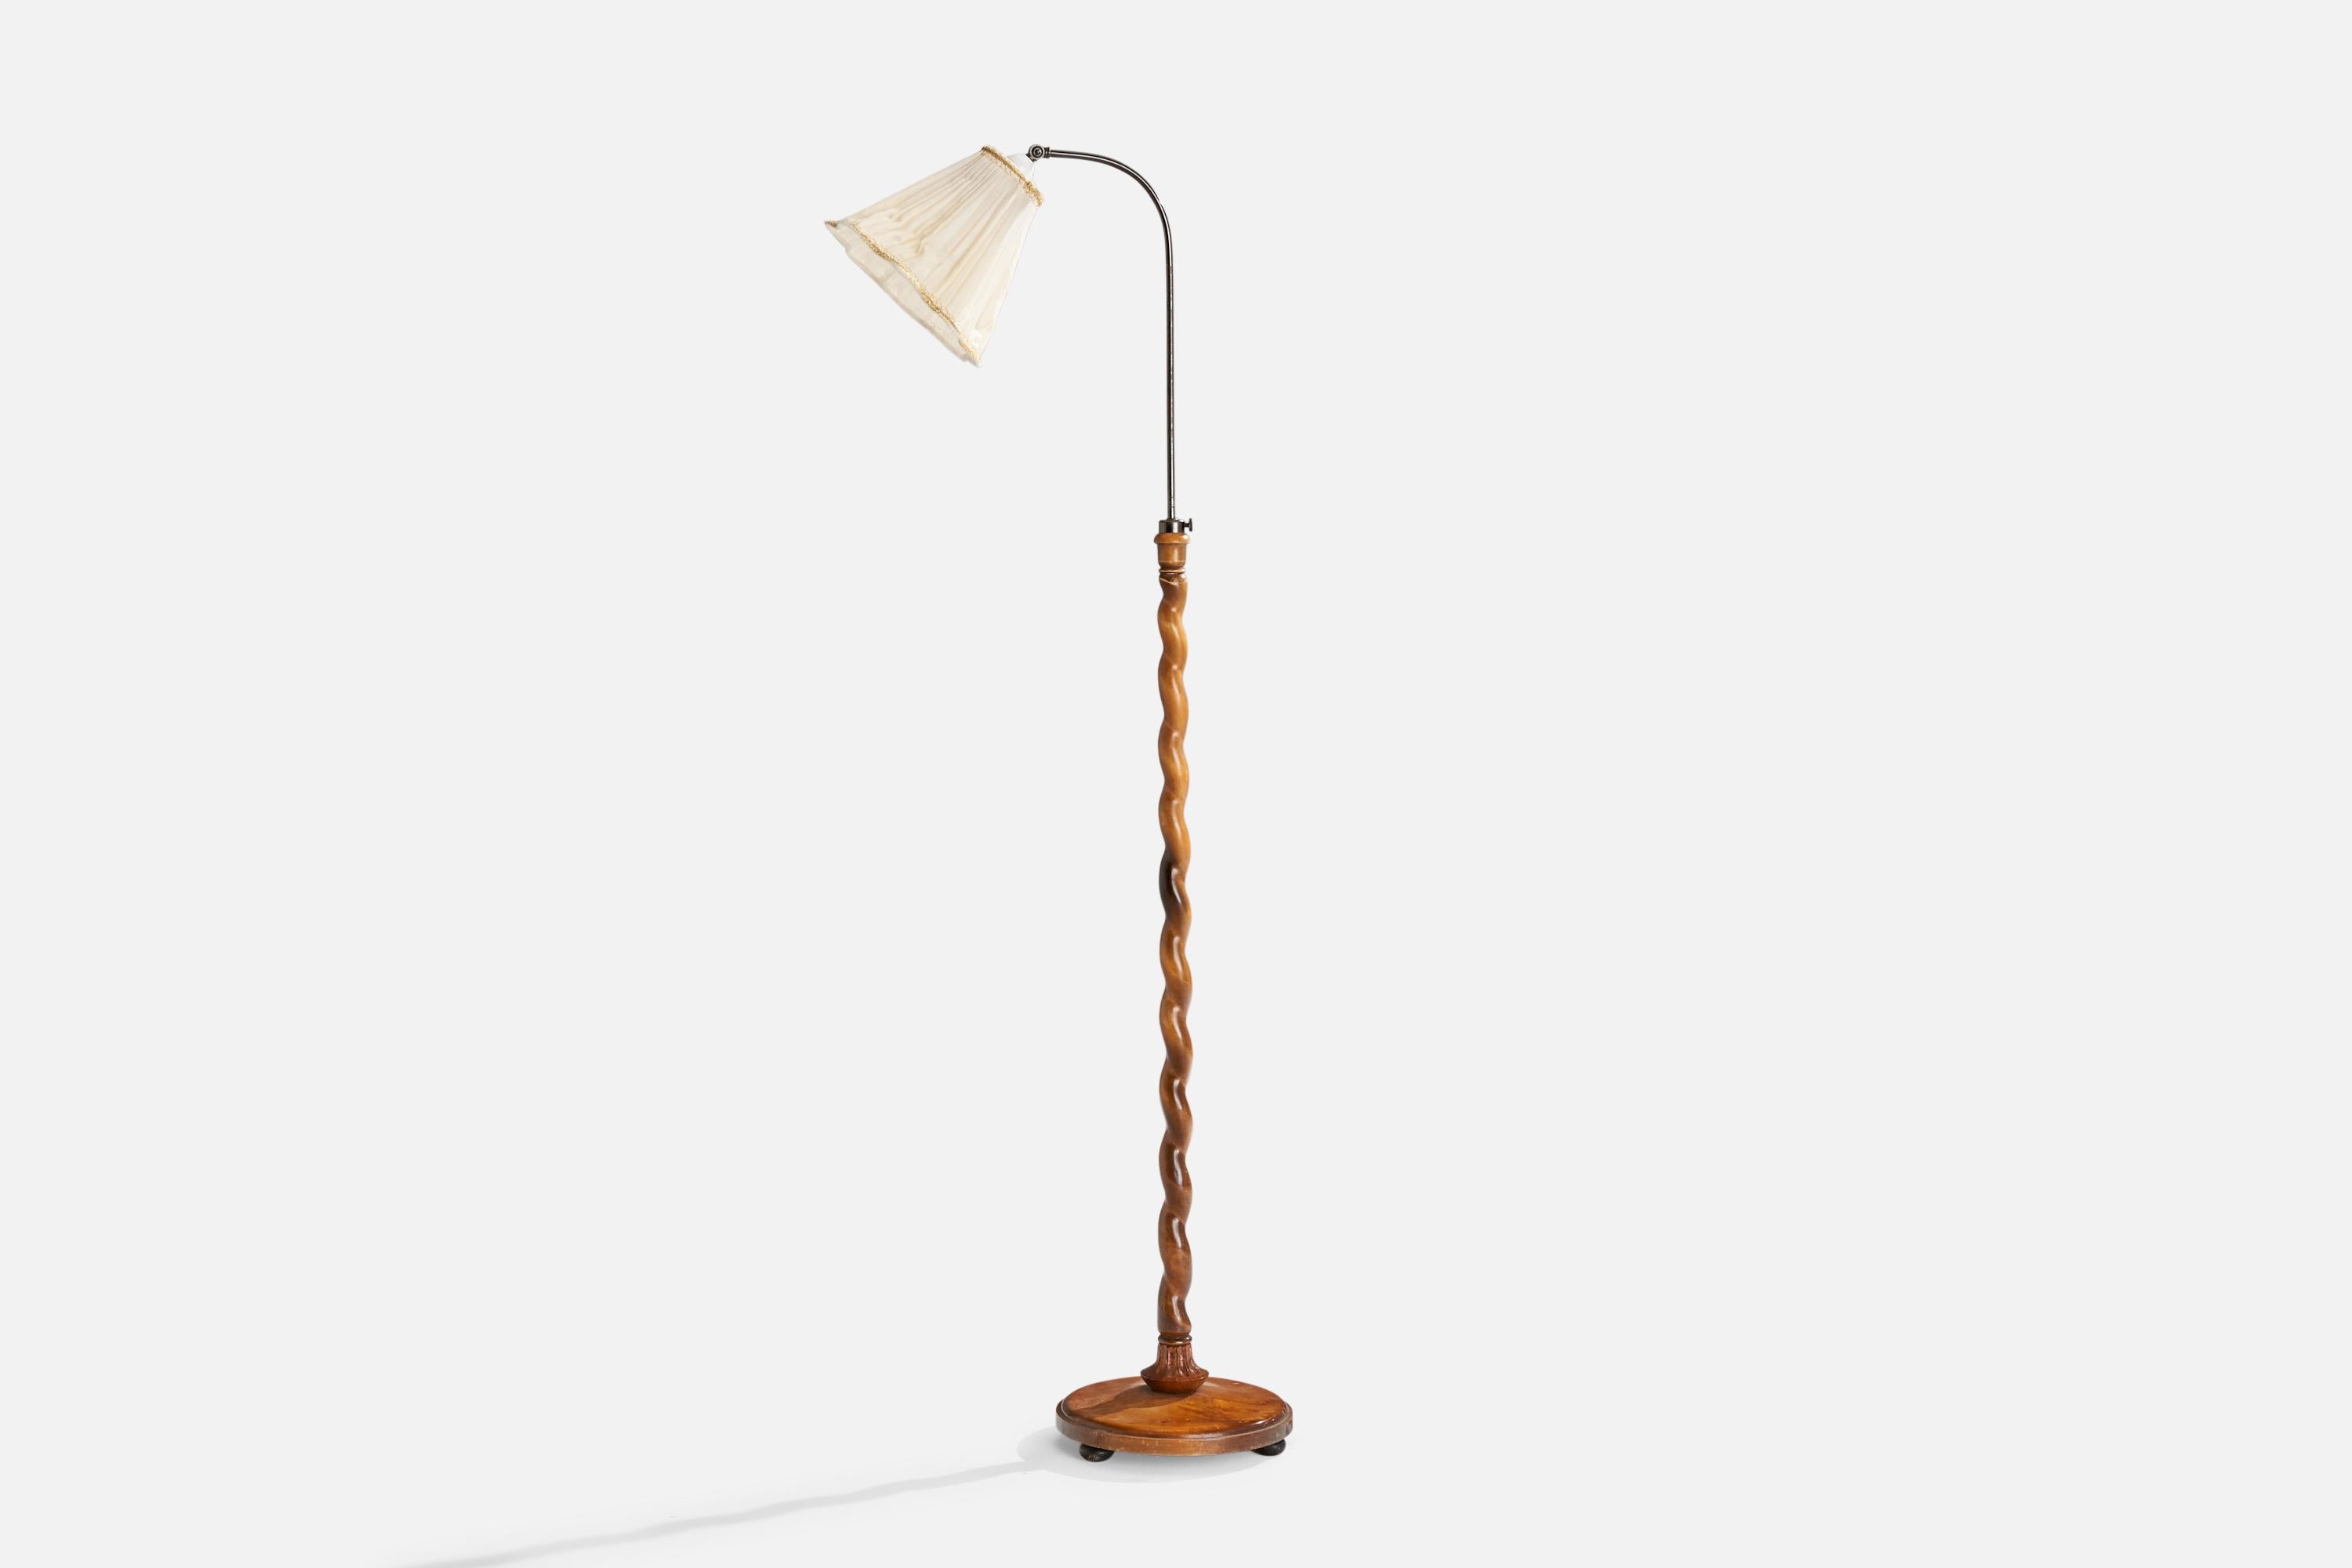 An adjustable birch, nickel-plated metal and fabric floor lamp designed and produced in Sweden, 1930s.

Dimensions variable 
Overall Dimensions (inches): 61” H x 9.5” W x 18.25” D
Stated dimensions include shade.
Bulb Specifications: E-26